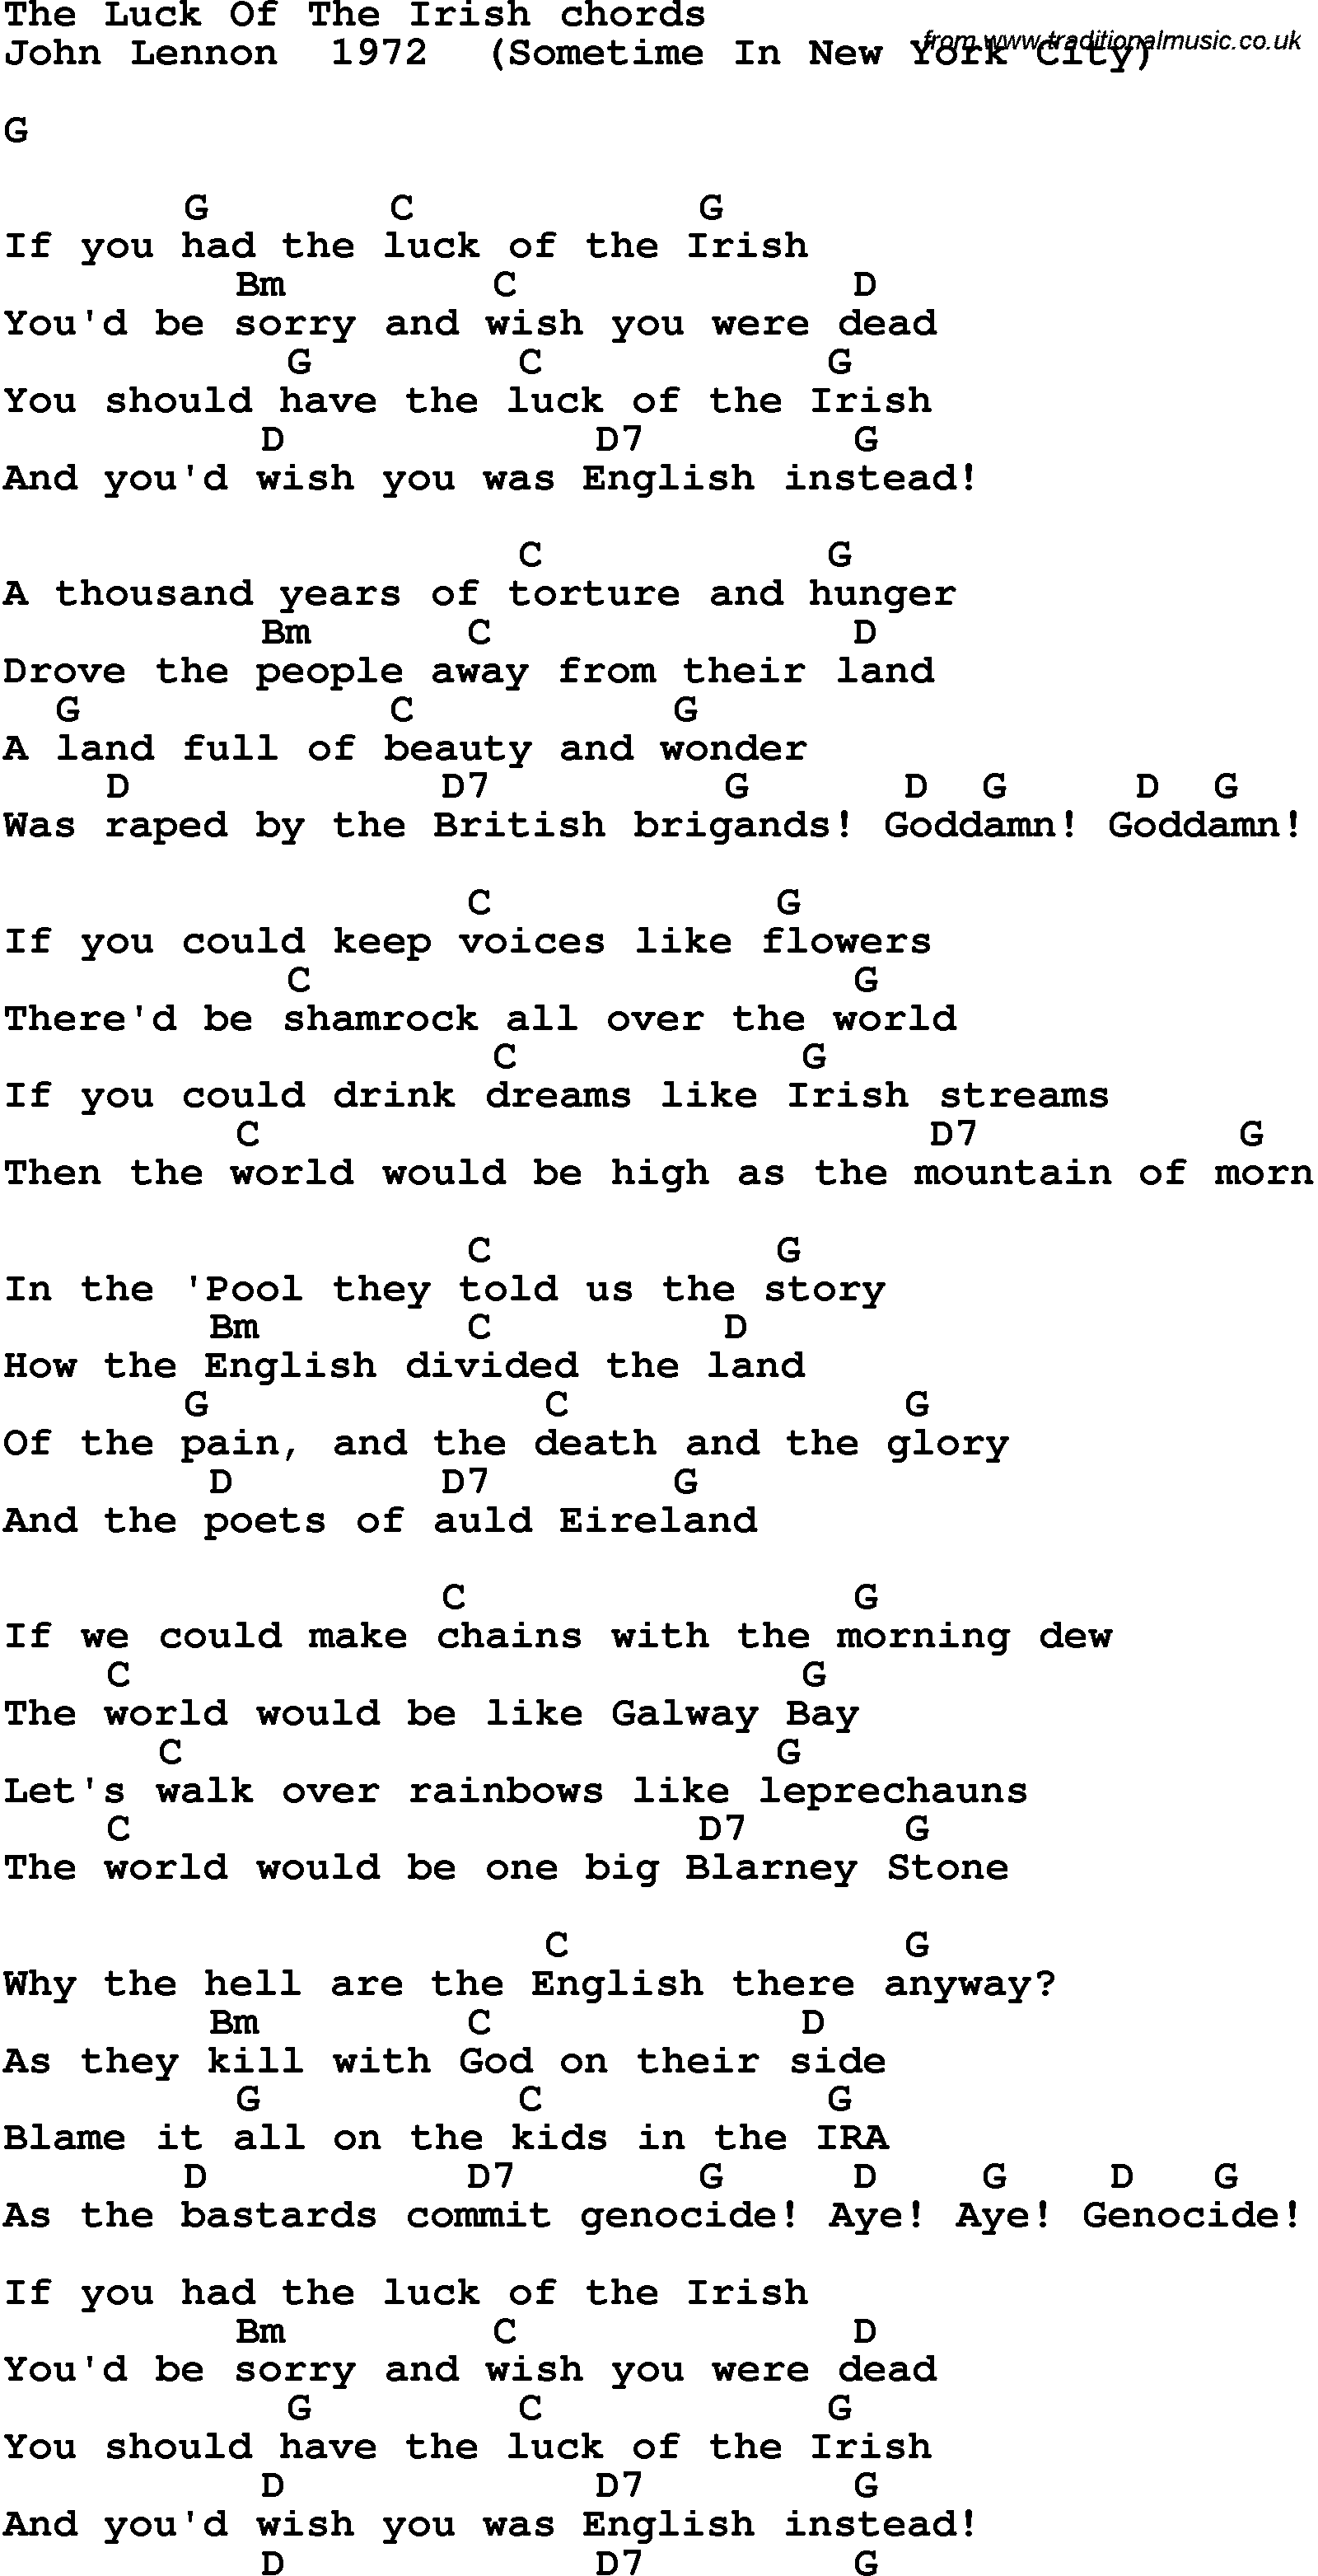 Song Lyrics with guitar chords for The Luck Of The Irish